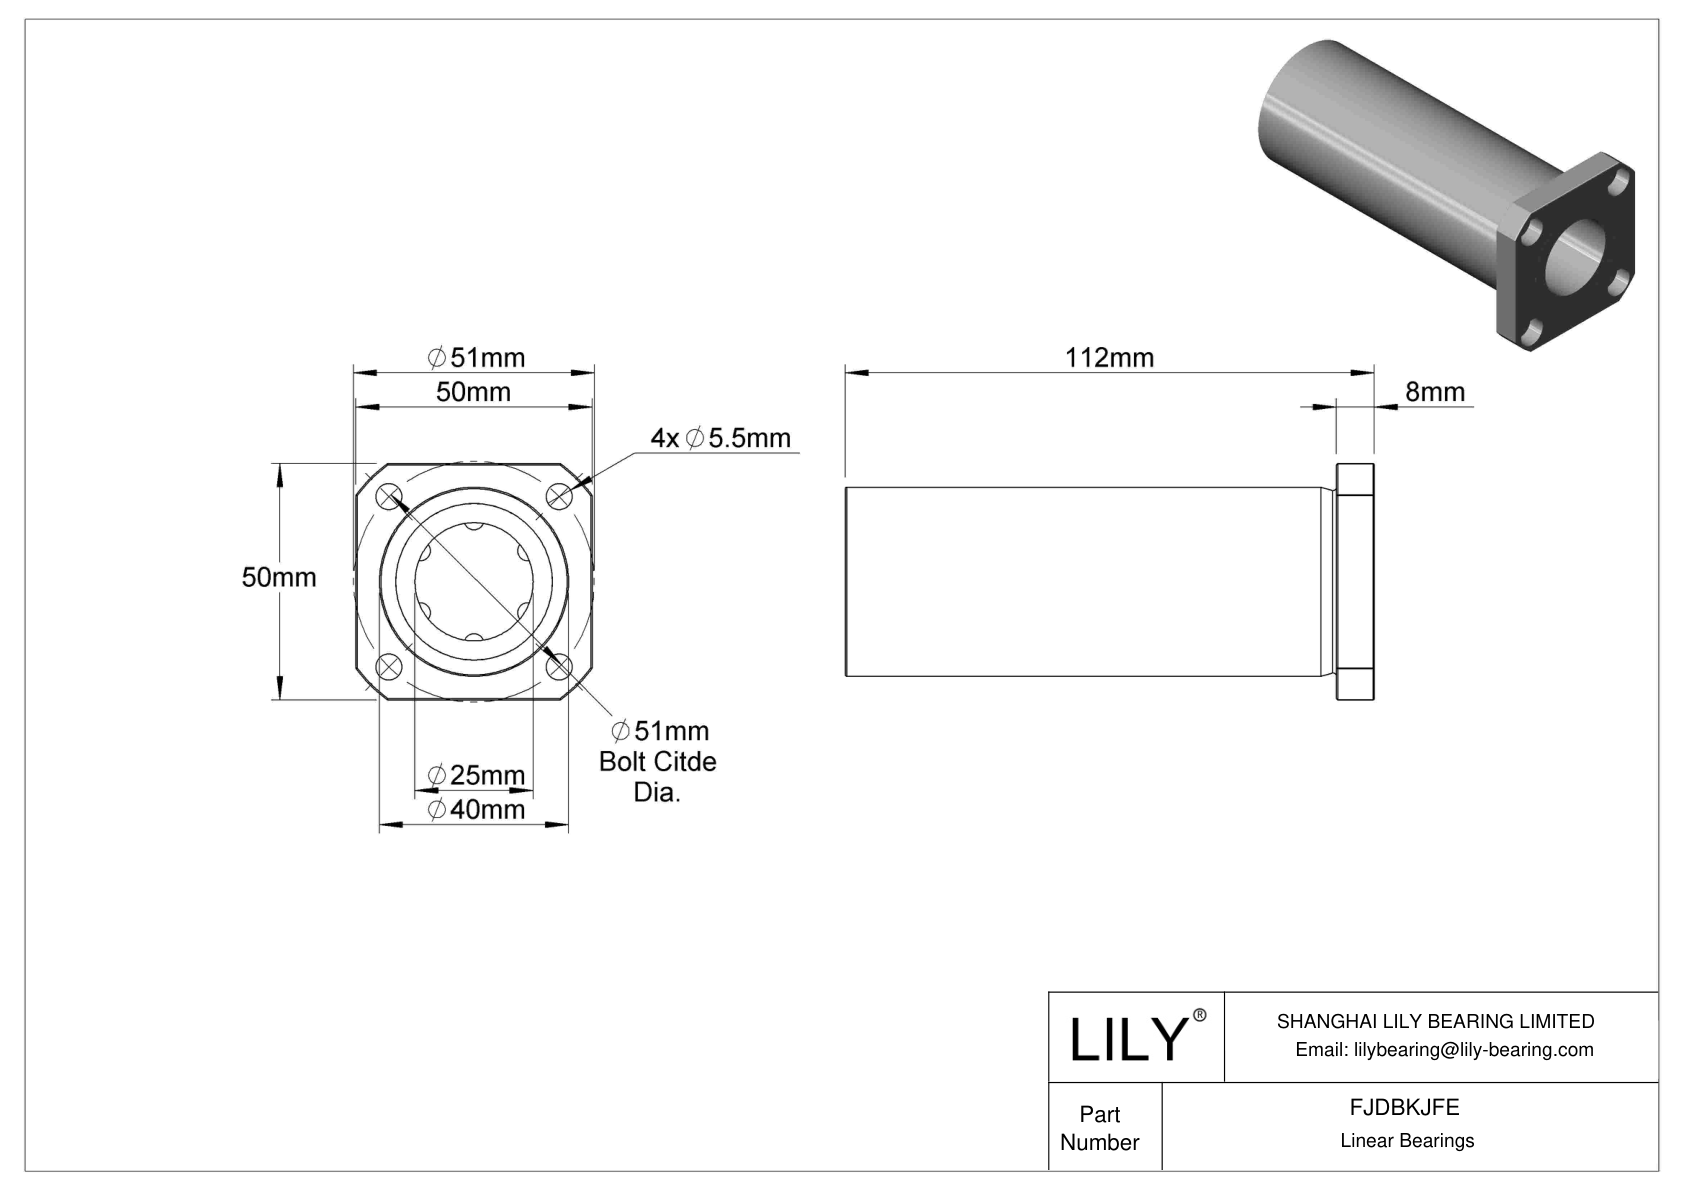 FJDBKJFE Corrosion-Resistant Flange-Mounted Linear Ball Bearings cad drawing